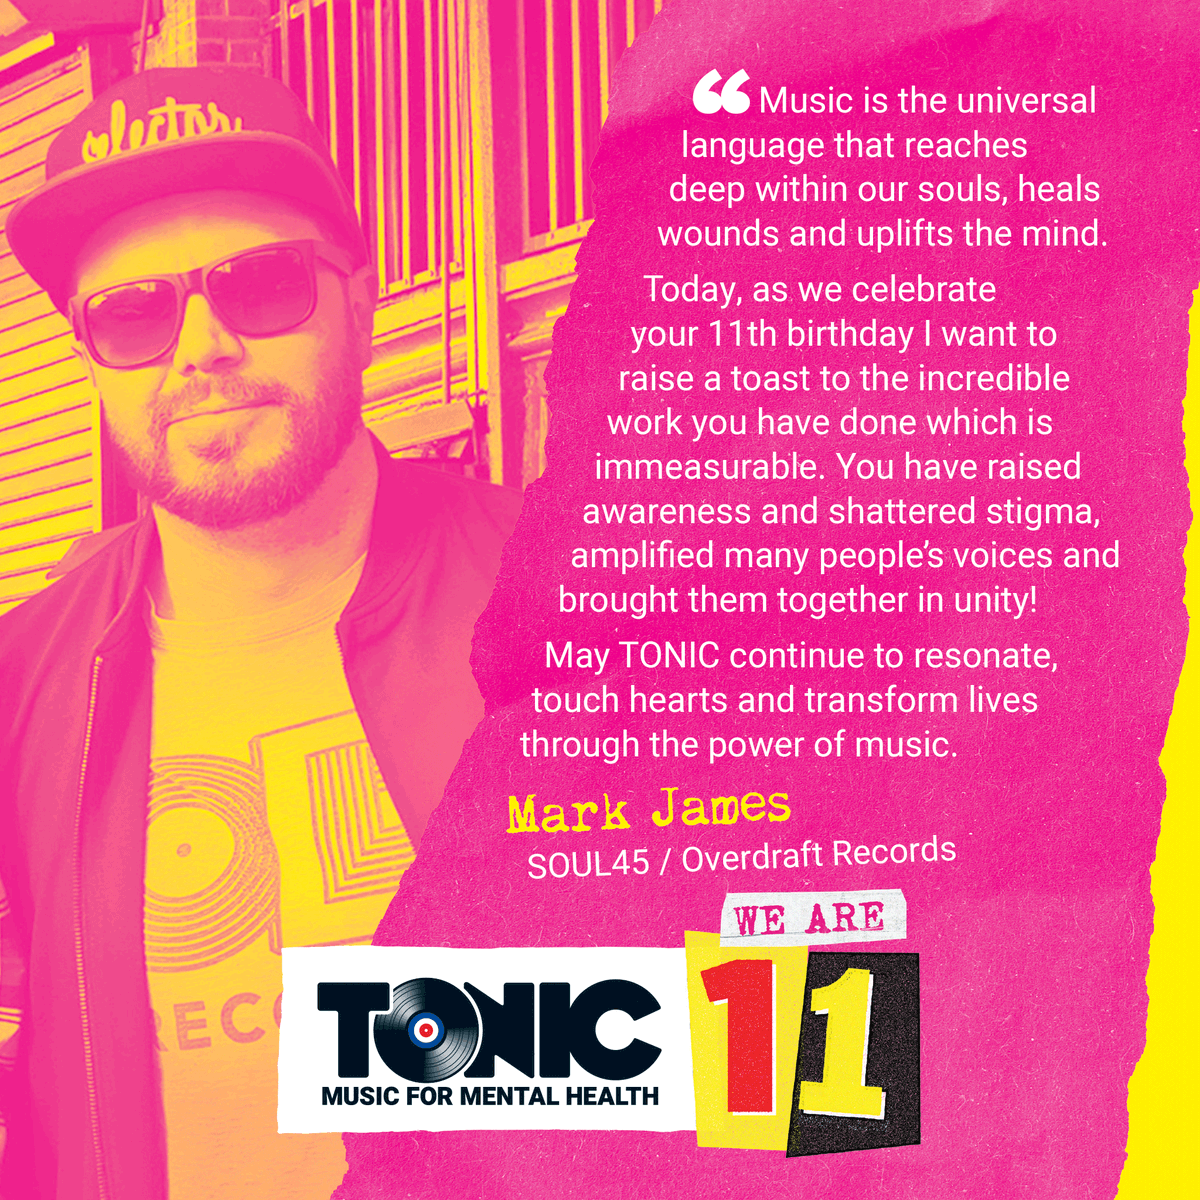 Tonic turns 11 today!
Thanks for the birthday messages...
@soul45djs 
@DJFormat

tonicmusic.co.uk/post/weare11
#MentalHealth #Music #Tonic #Wellbeing #birthday